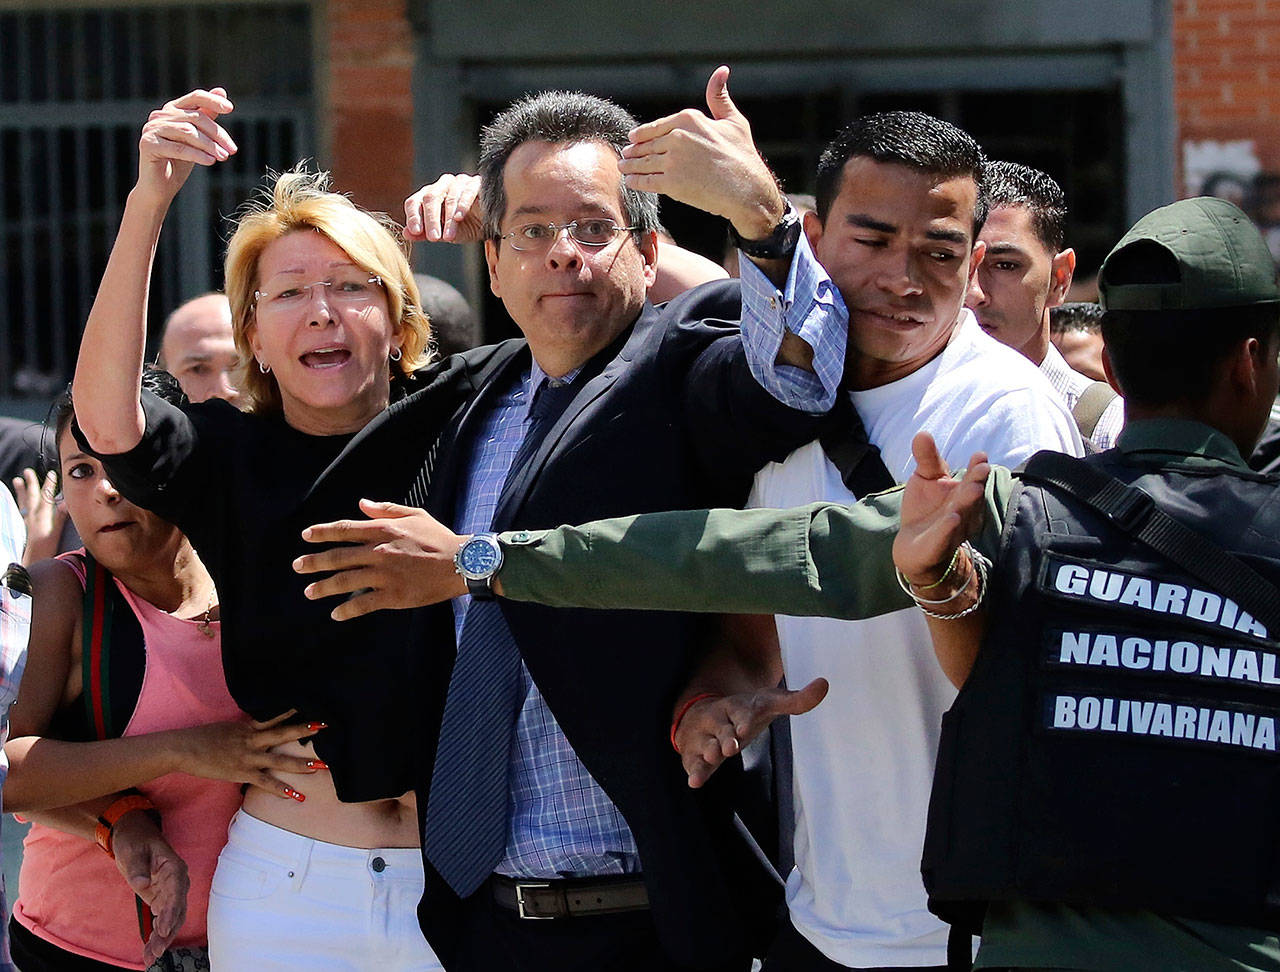 Venezuelan General Prosecutor Luisa Ortega Diaz is surrounded by loyal employees of the General Prosecutor’s office, as she was barred from entering by security forces outside of the General Prosecutor headquarters in Caracas, Venezuela, on Saturday. (AP Photo/Wil Riera)